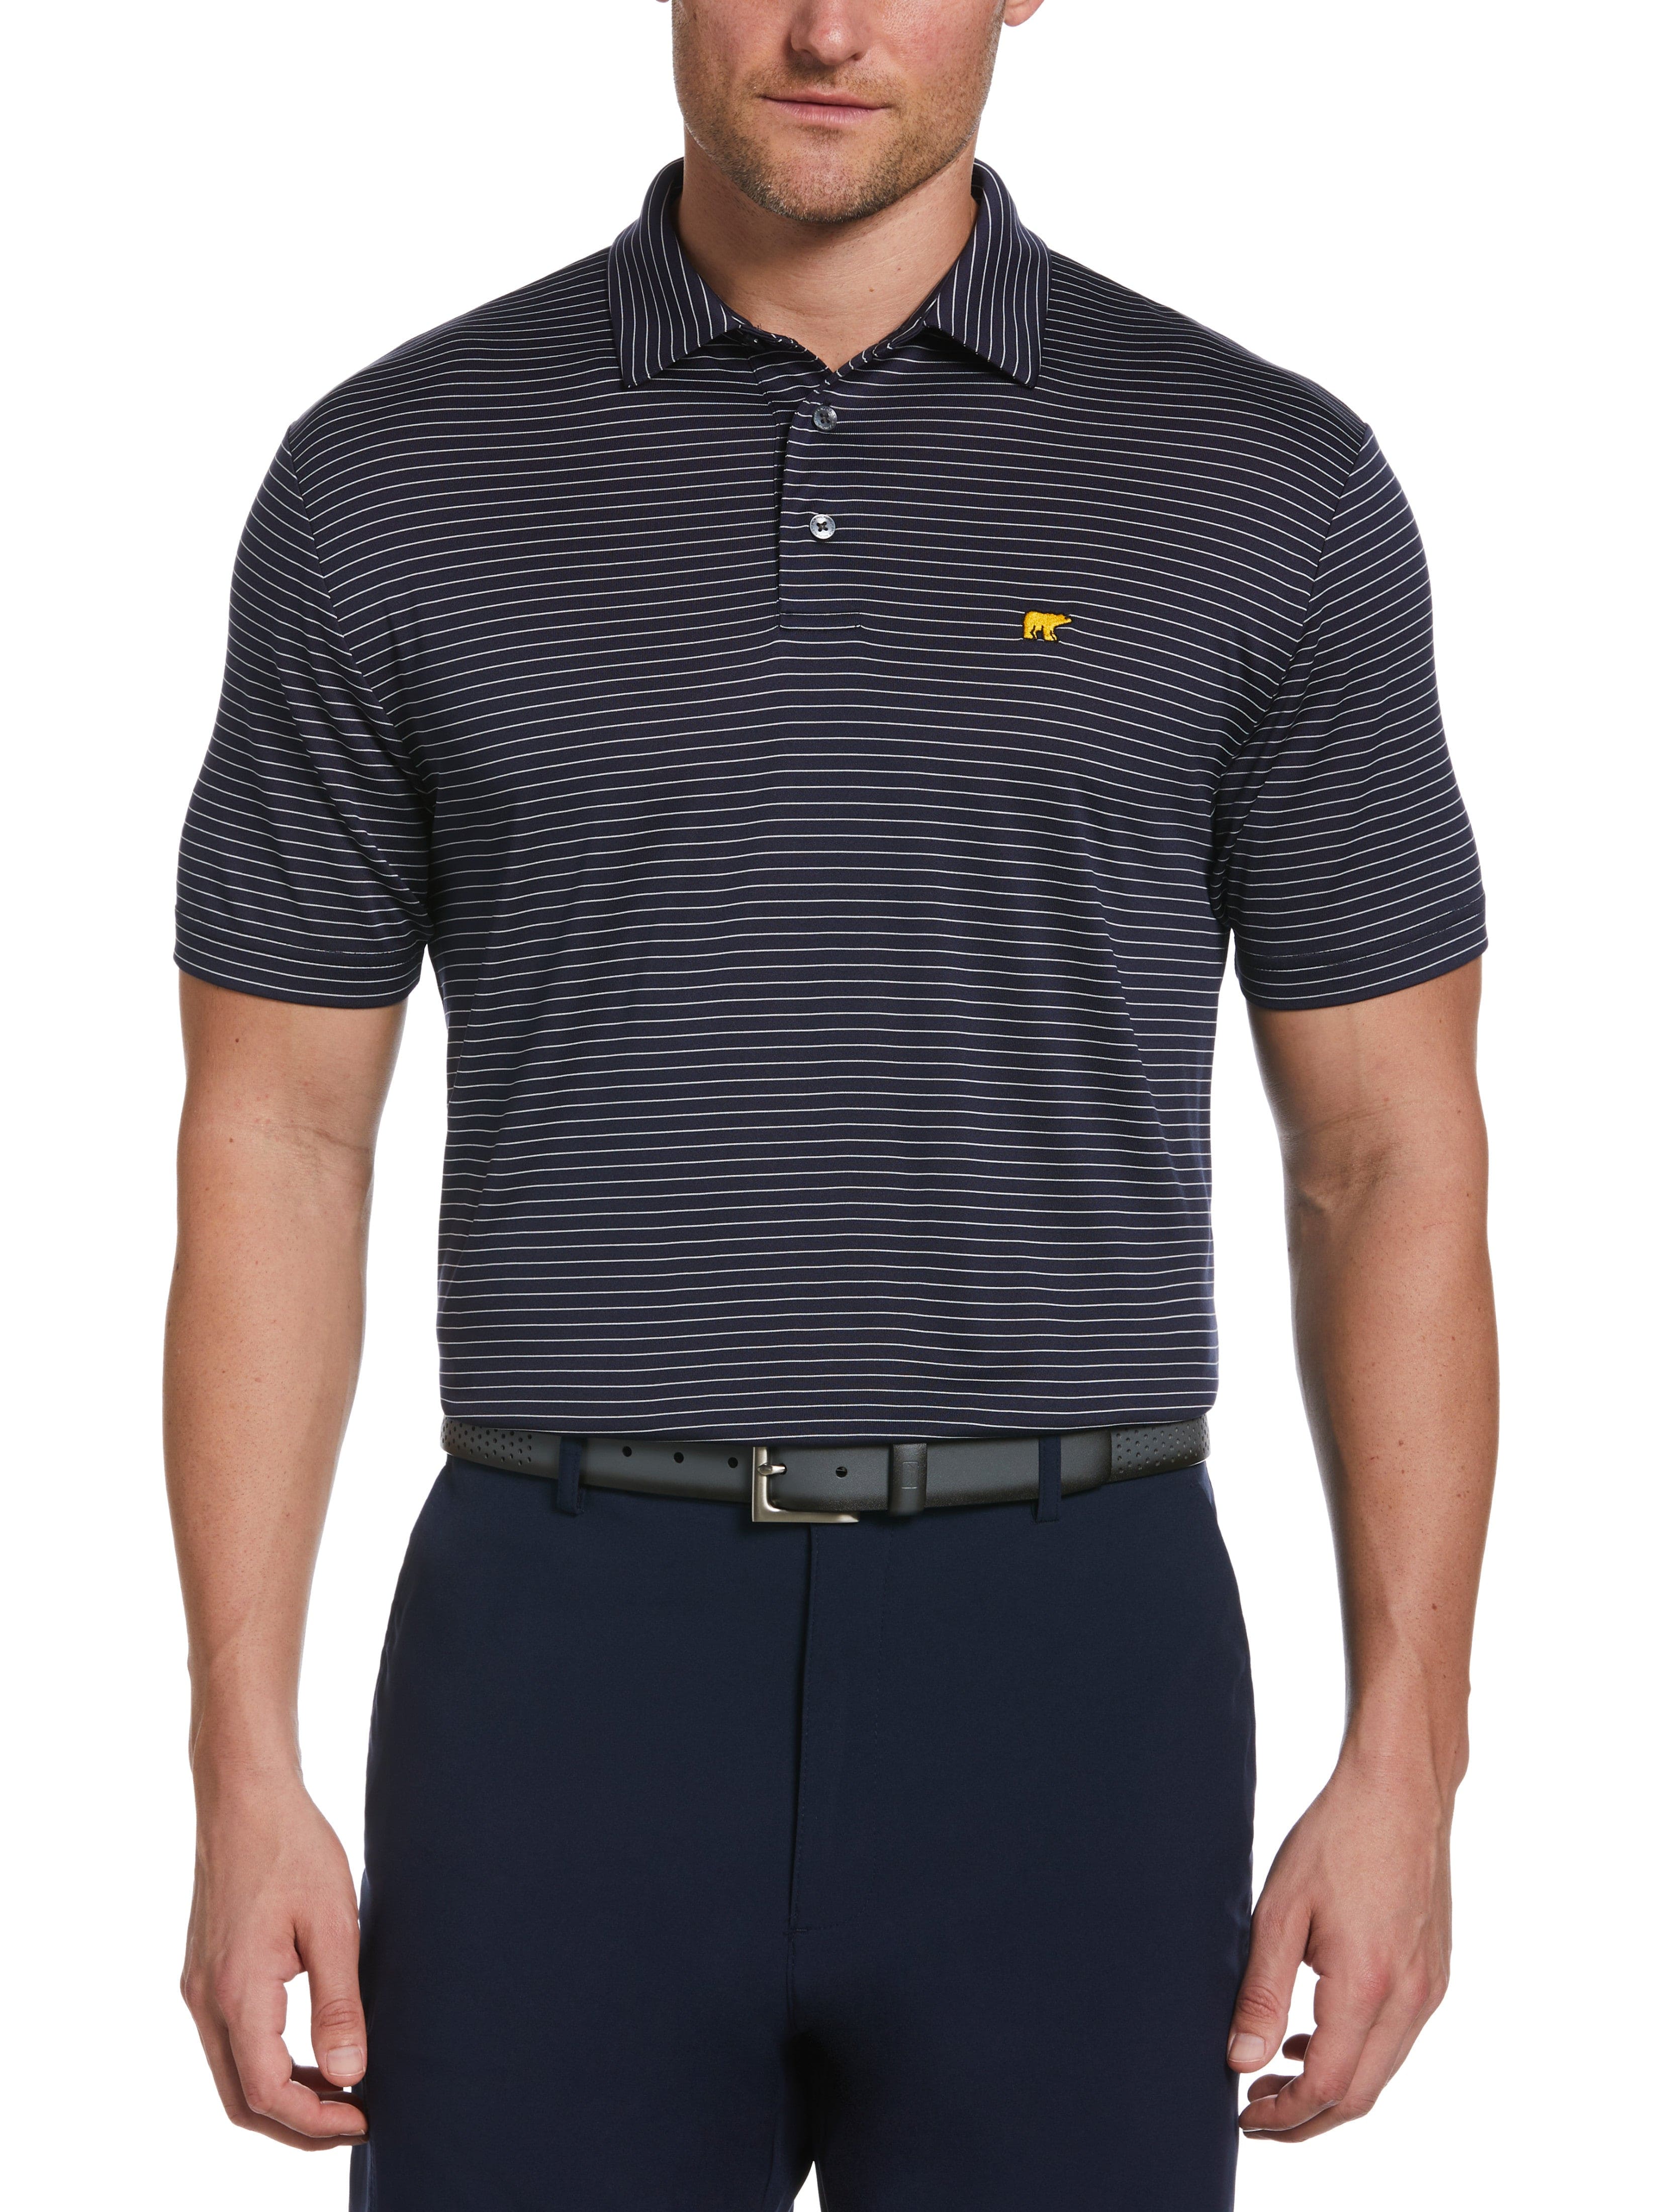 Jack Nicklaus Mens Two Color Stripe Golf Polo Shirt, Size Medium, Classic Navy Blue, 100% Polyester | Golf Apparel Shop